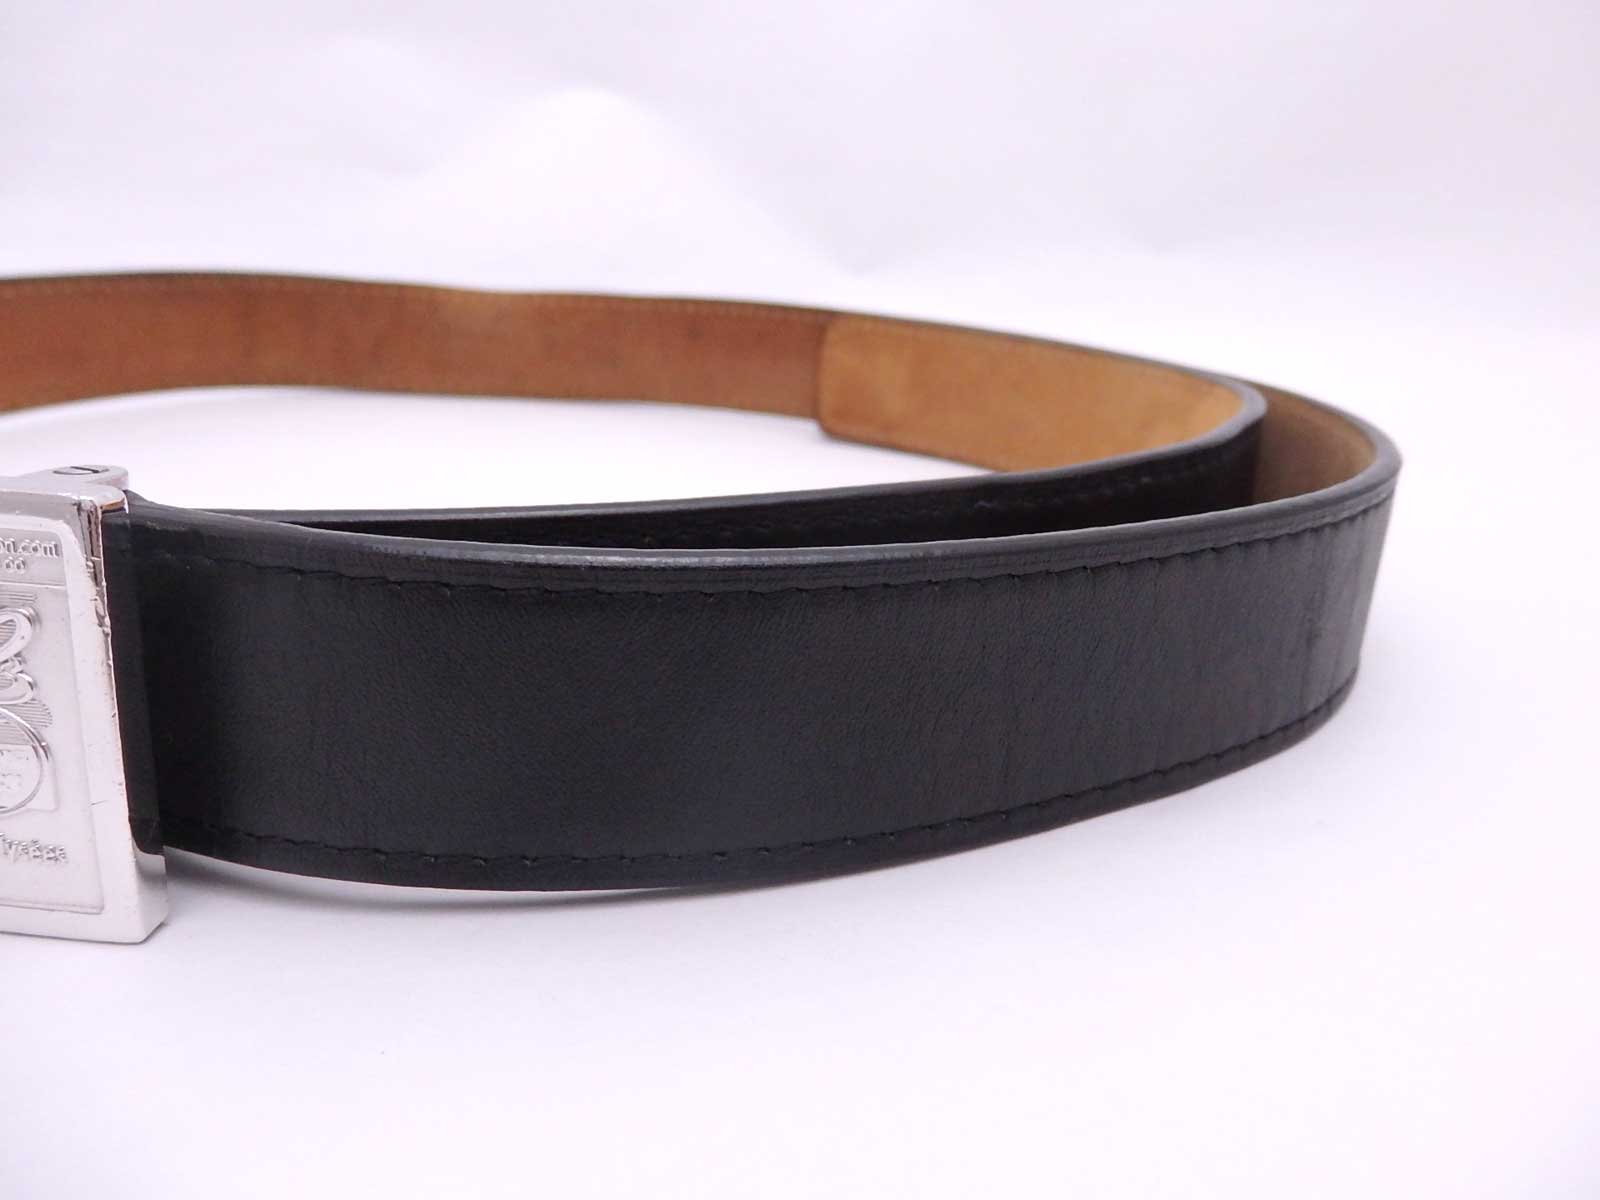 Auth Louis Vuitton Buckle Belt Size: 90/36 Black Leather/Silver *USED* - e26780 | eBay